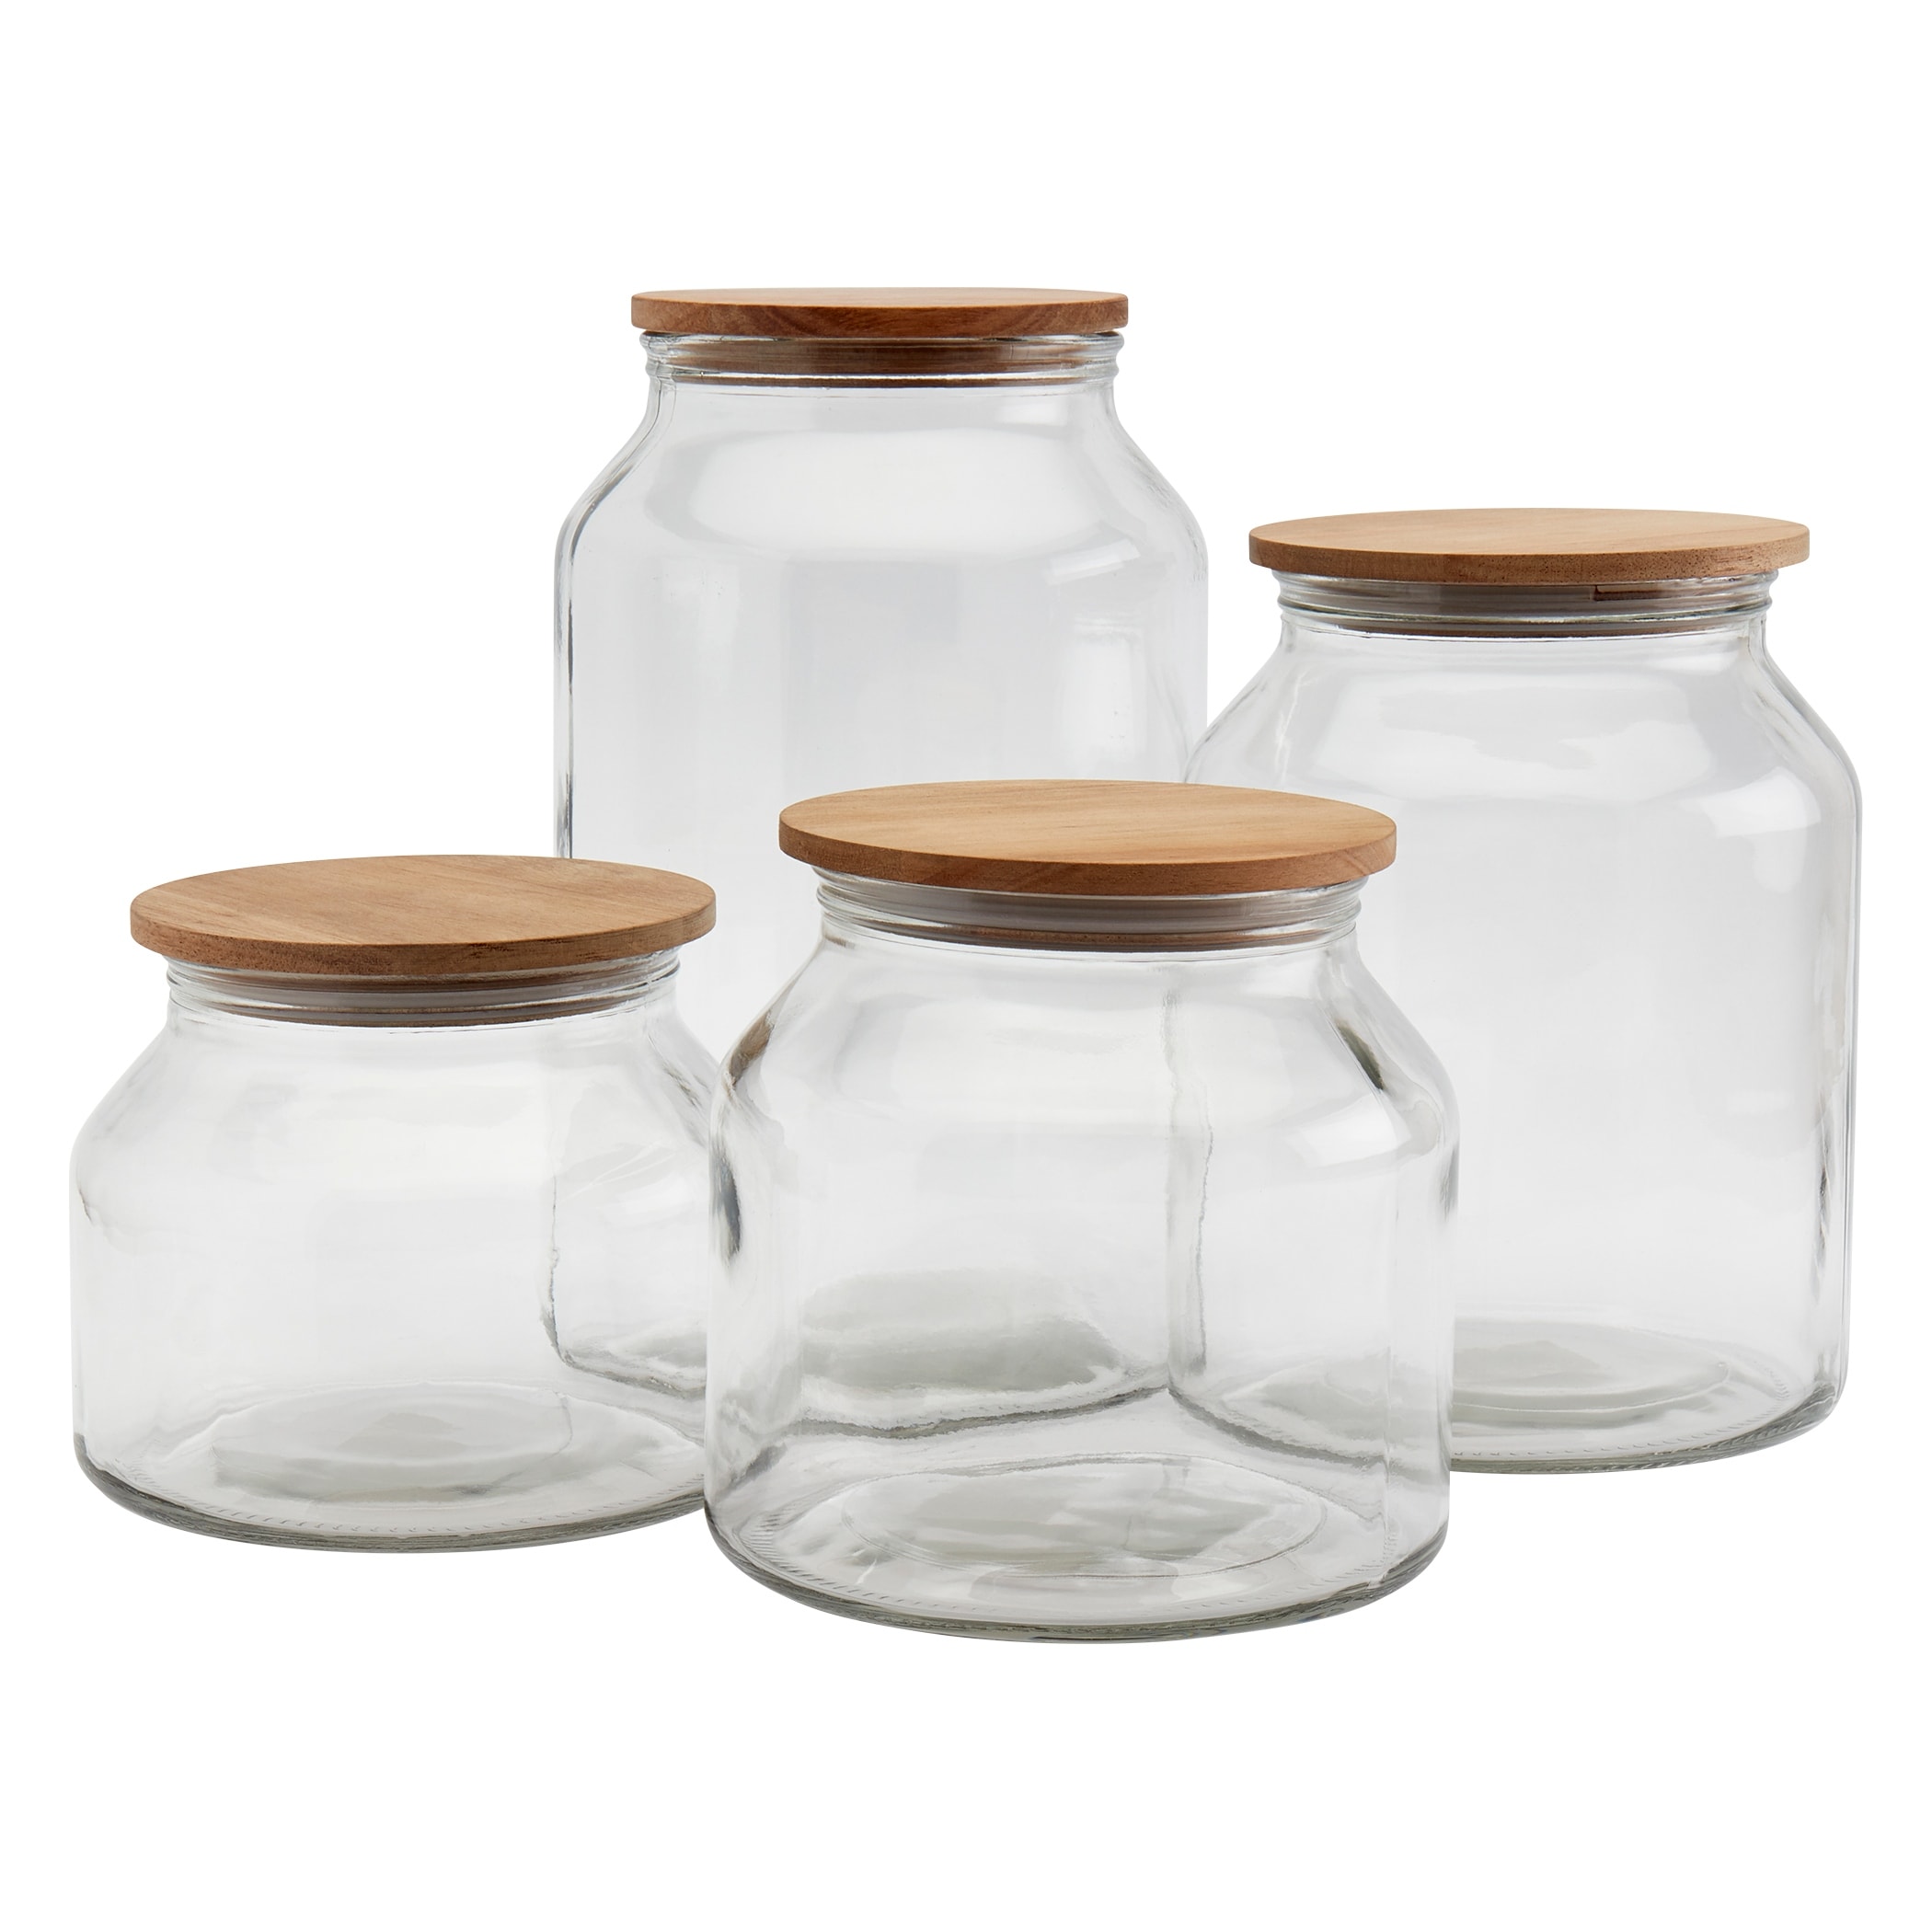 https://ak1.ostkcdn.com/images/products/is/images/direct/c48c8367ec52a8d6b9e65bd4fa4e02e7b0feff88/Mason-Craft-%26-More-European-Belly-Glass-Canisters-w--Acacia-Lids---Set-of-4.jpg